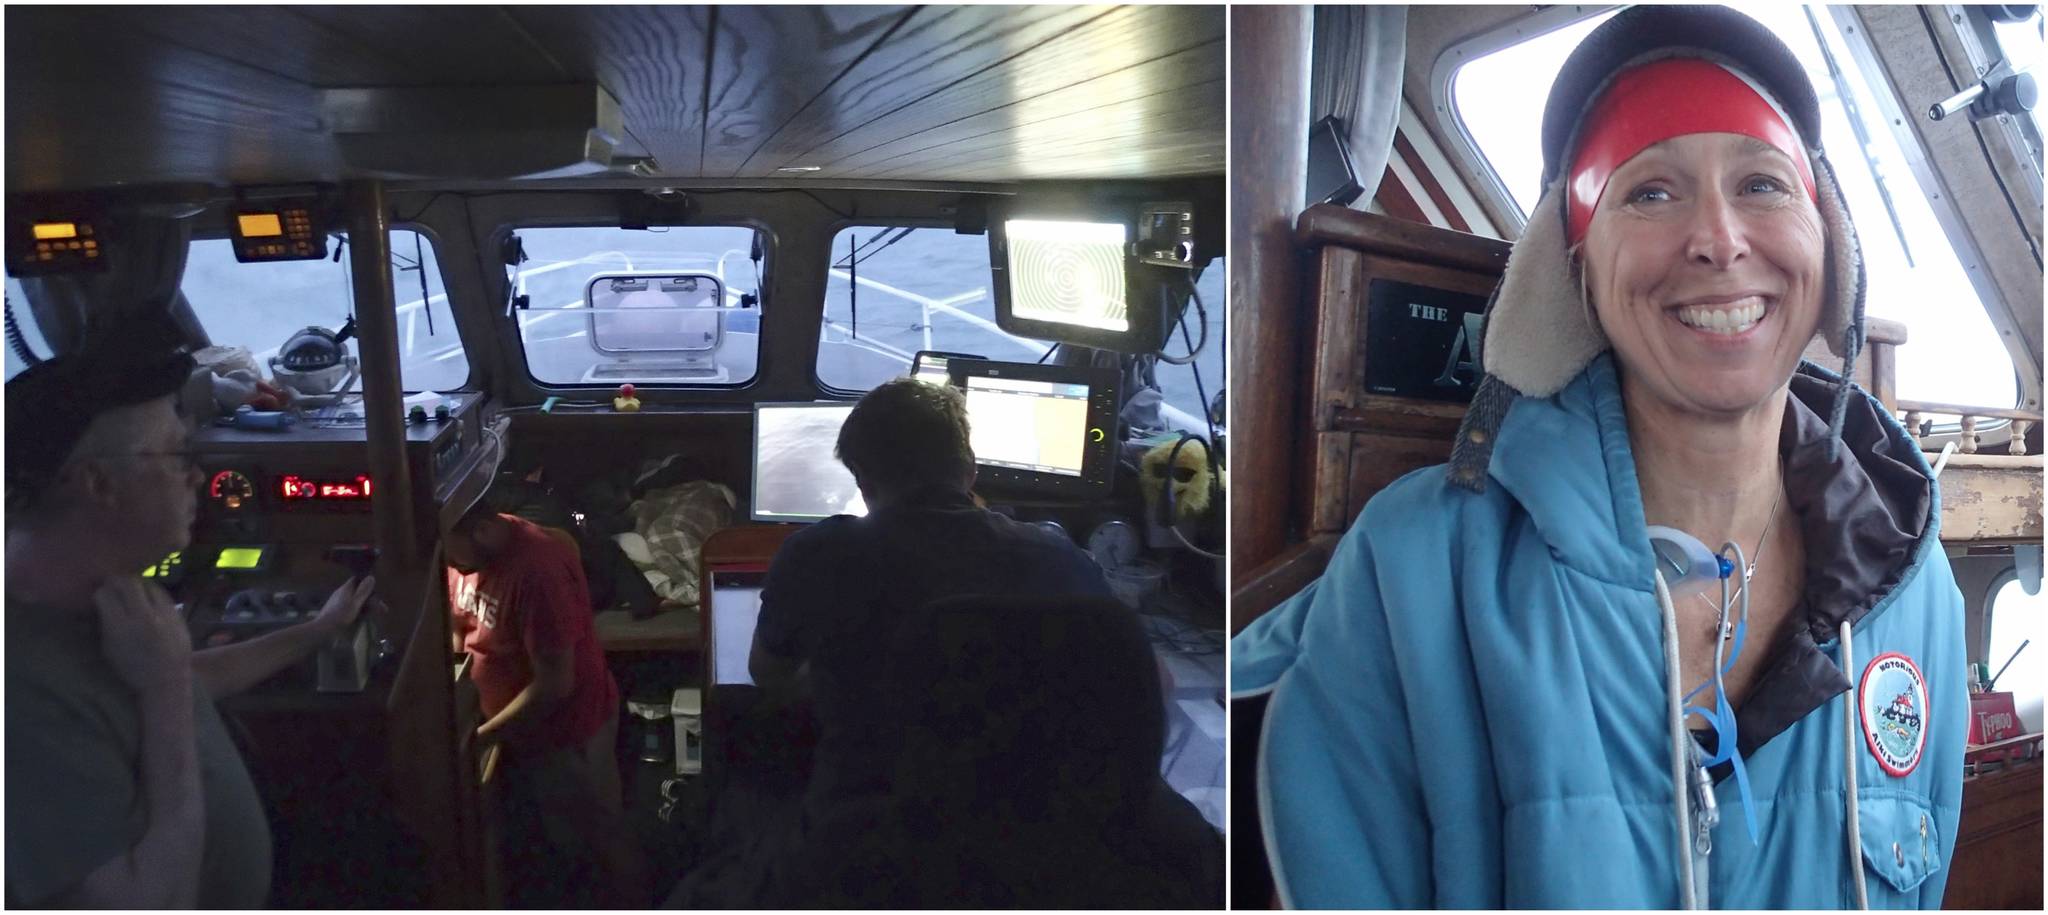 Left, inside the vessel Sea Satin. Right, islander Heidi Skrzypek in between her legs of the swim-relay crossing of the English Channel (Courtesy Photos).